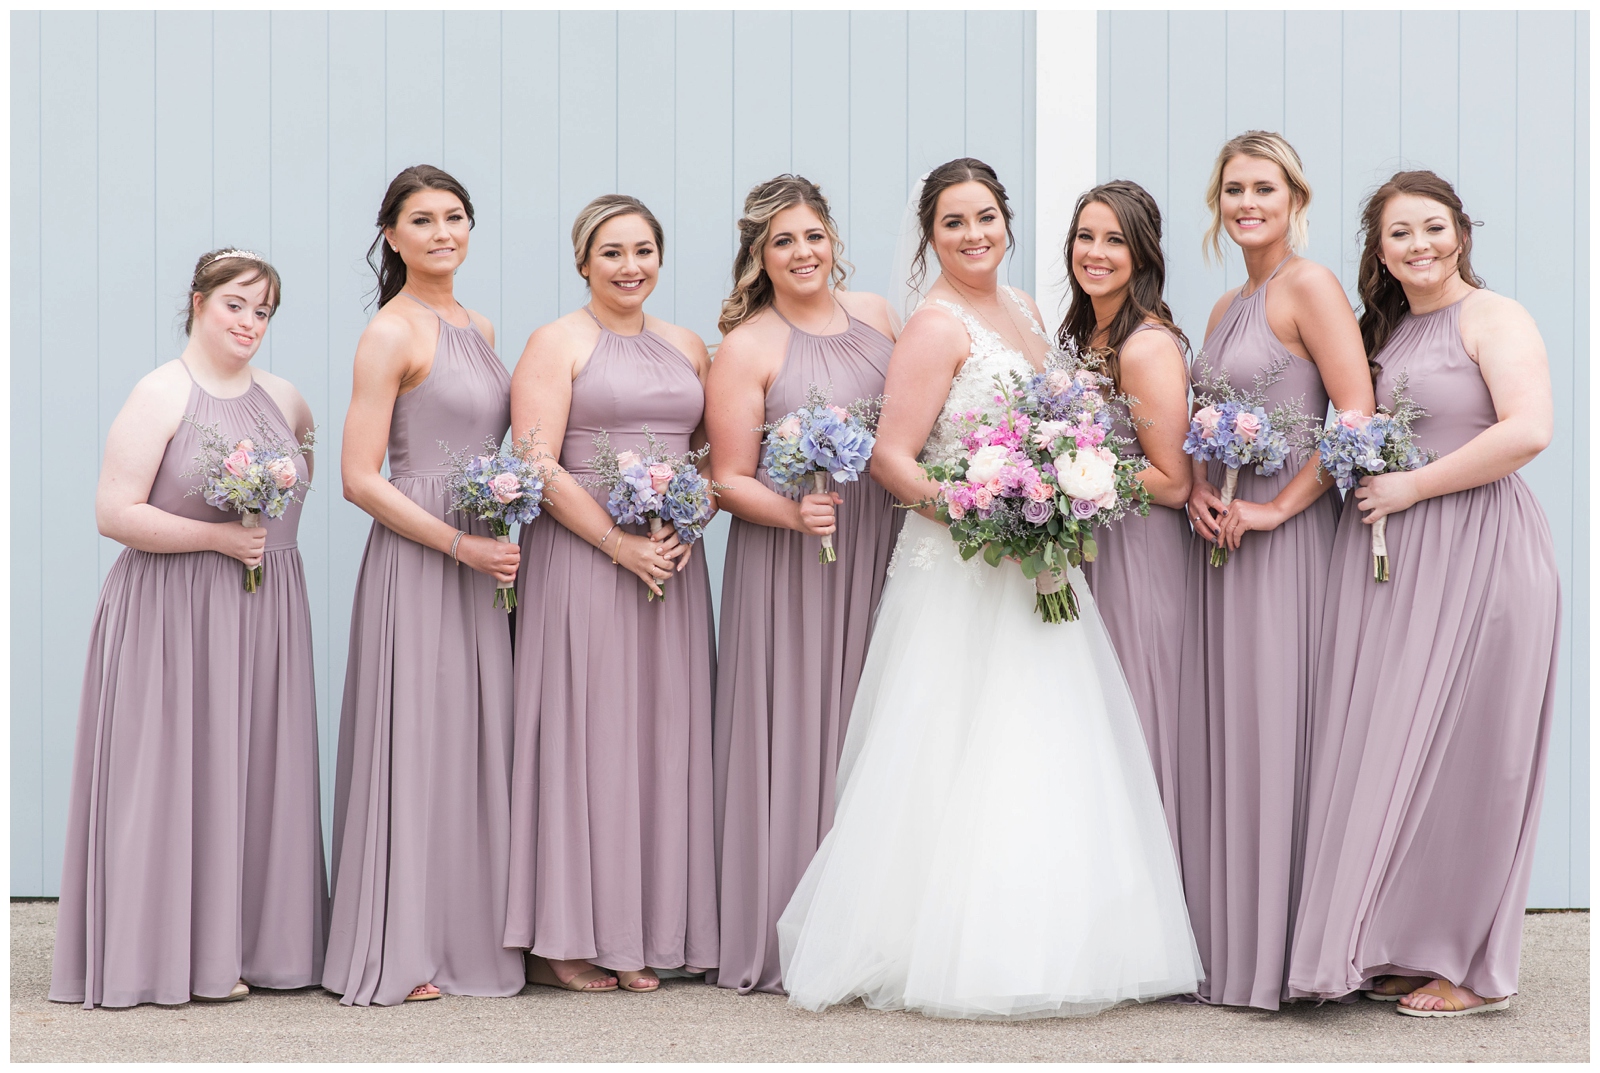 7 bridesmaids hold pastel wedding bouquets with bride at Pretty Prairie Farms